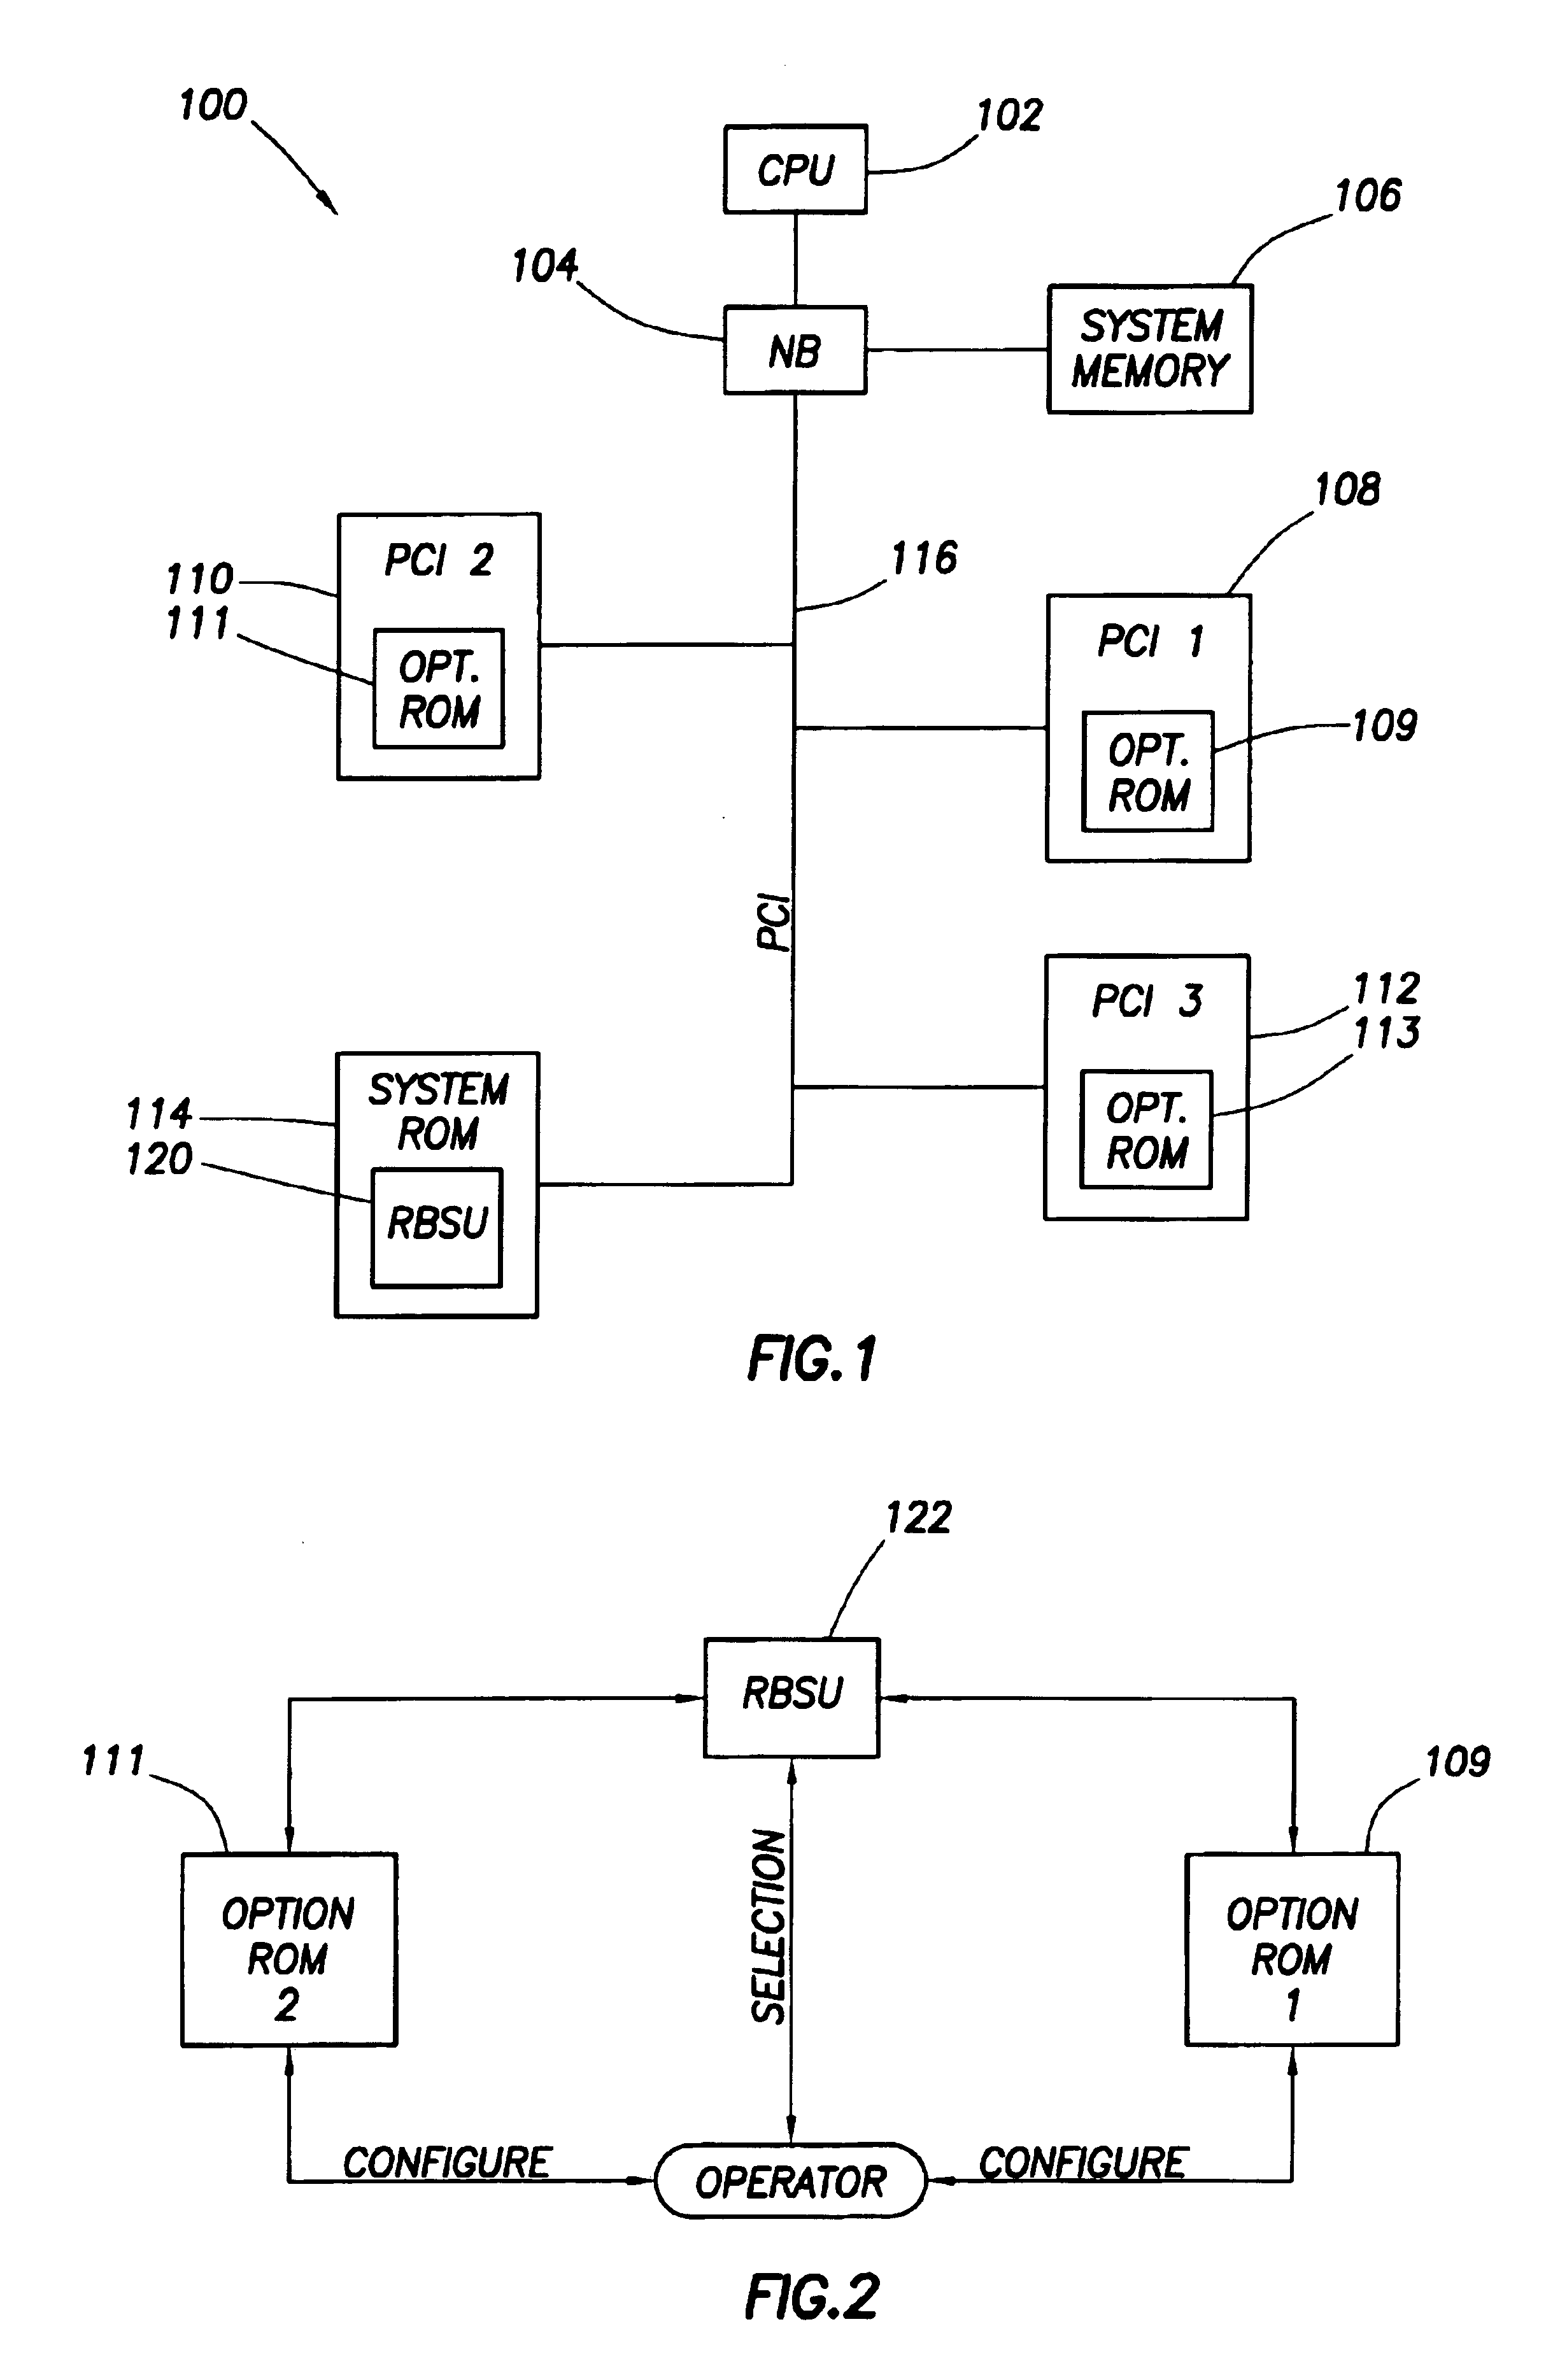 Method for expansion and integration of option ROM support utilities for run-time/boot-time usage